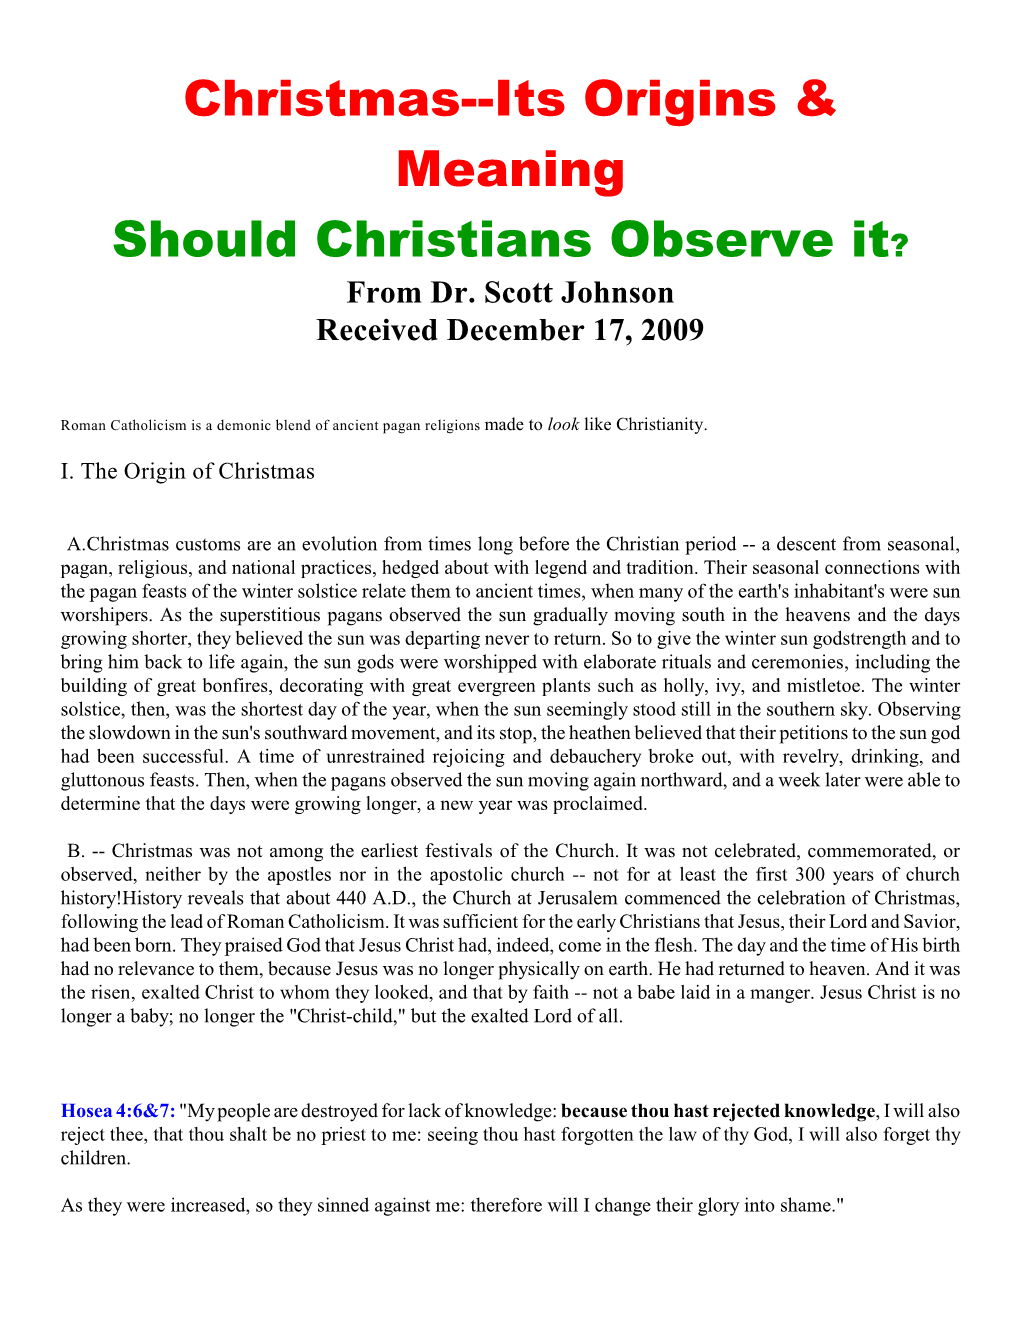 Christmas--Its Origins & Meaning